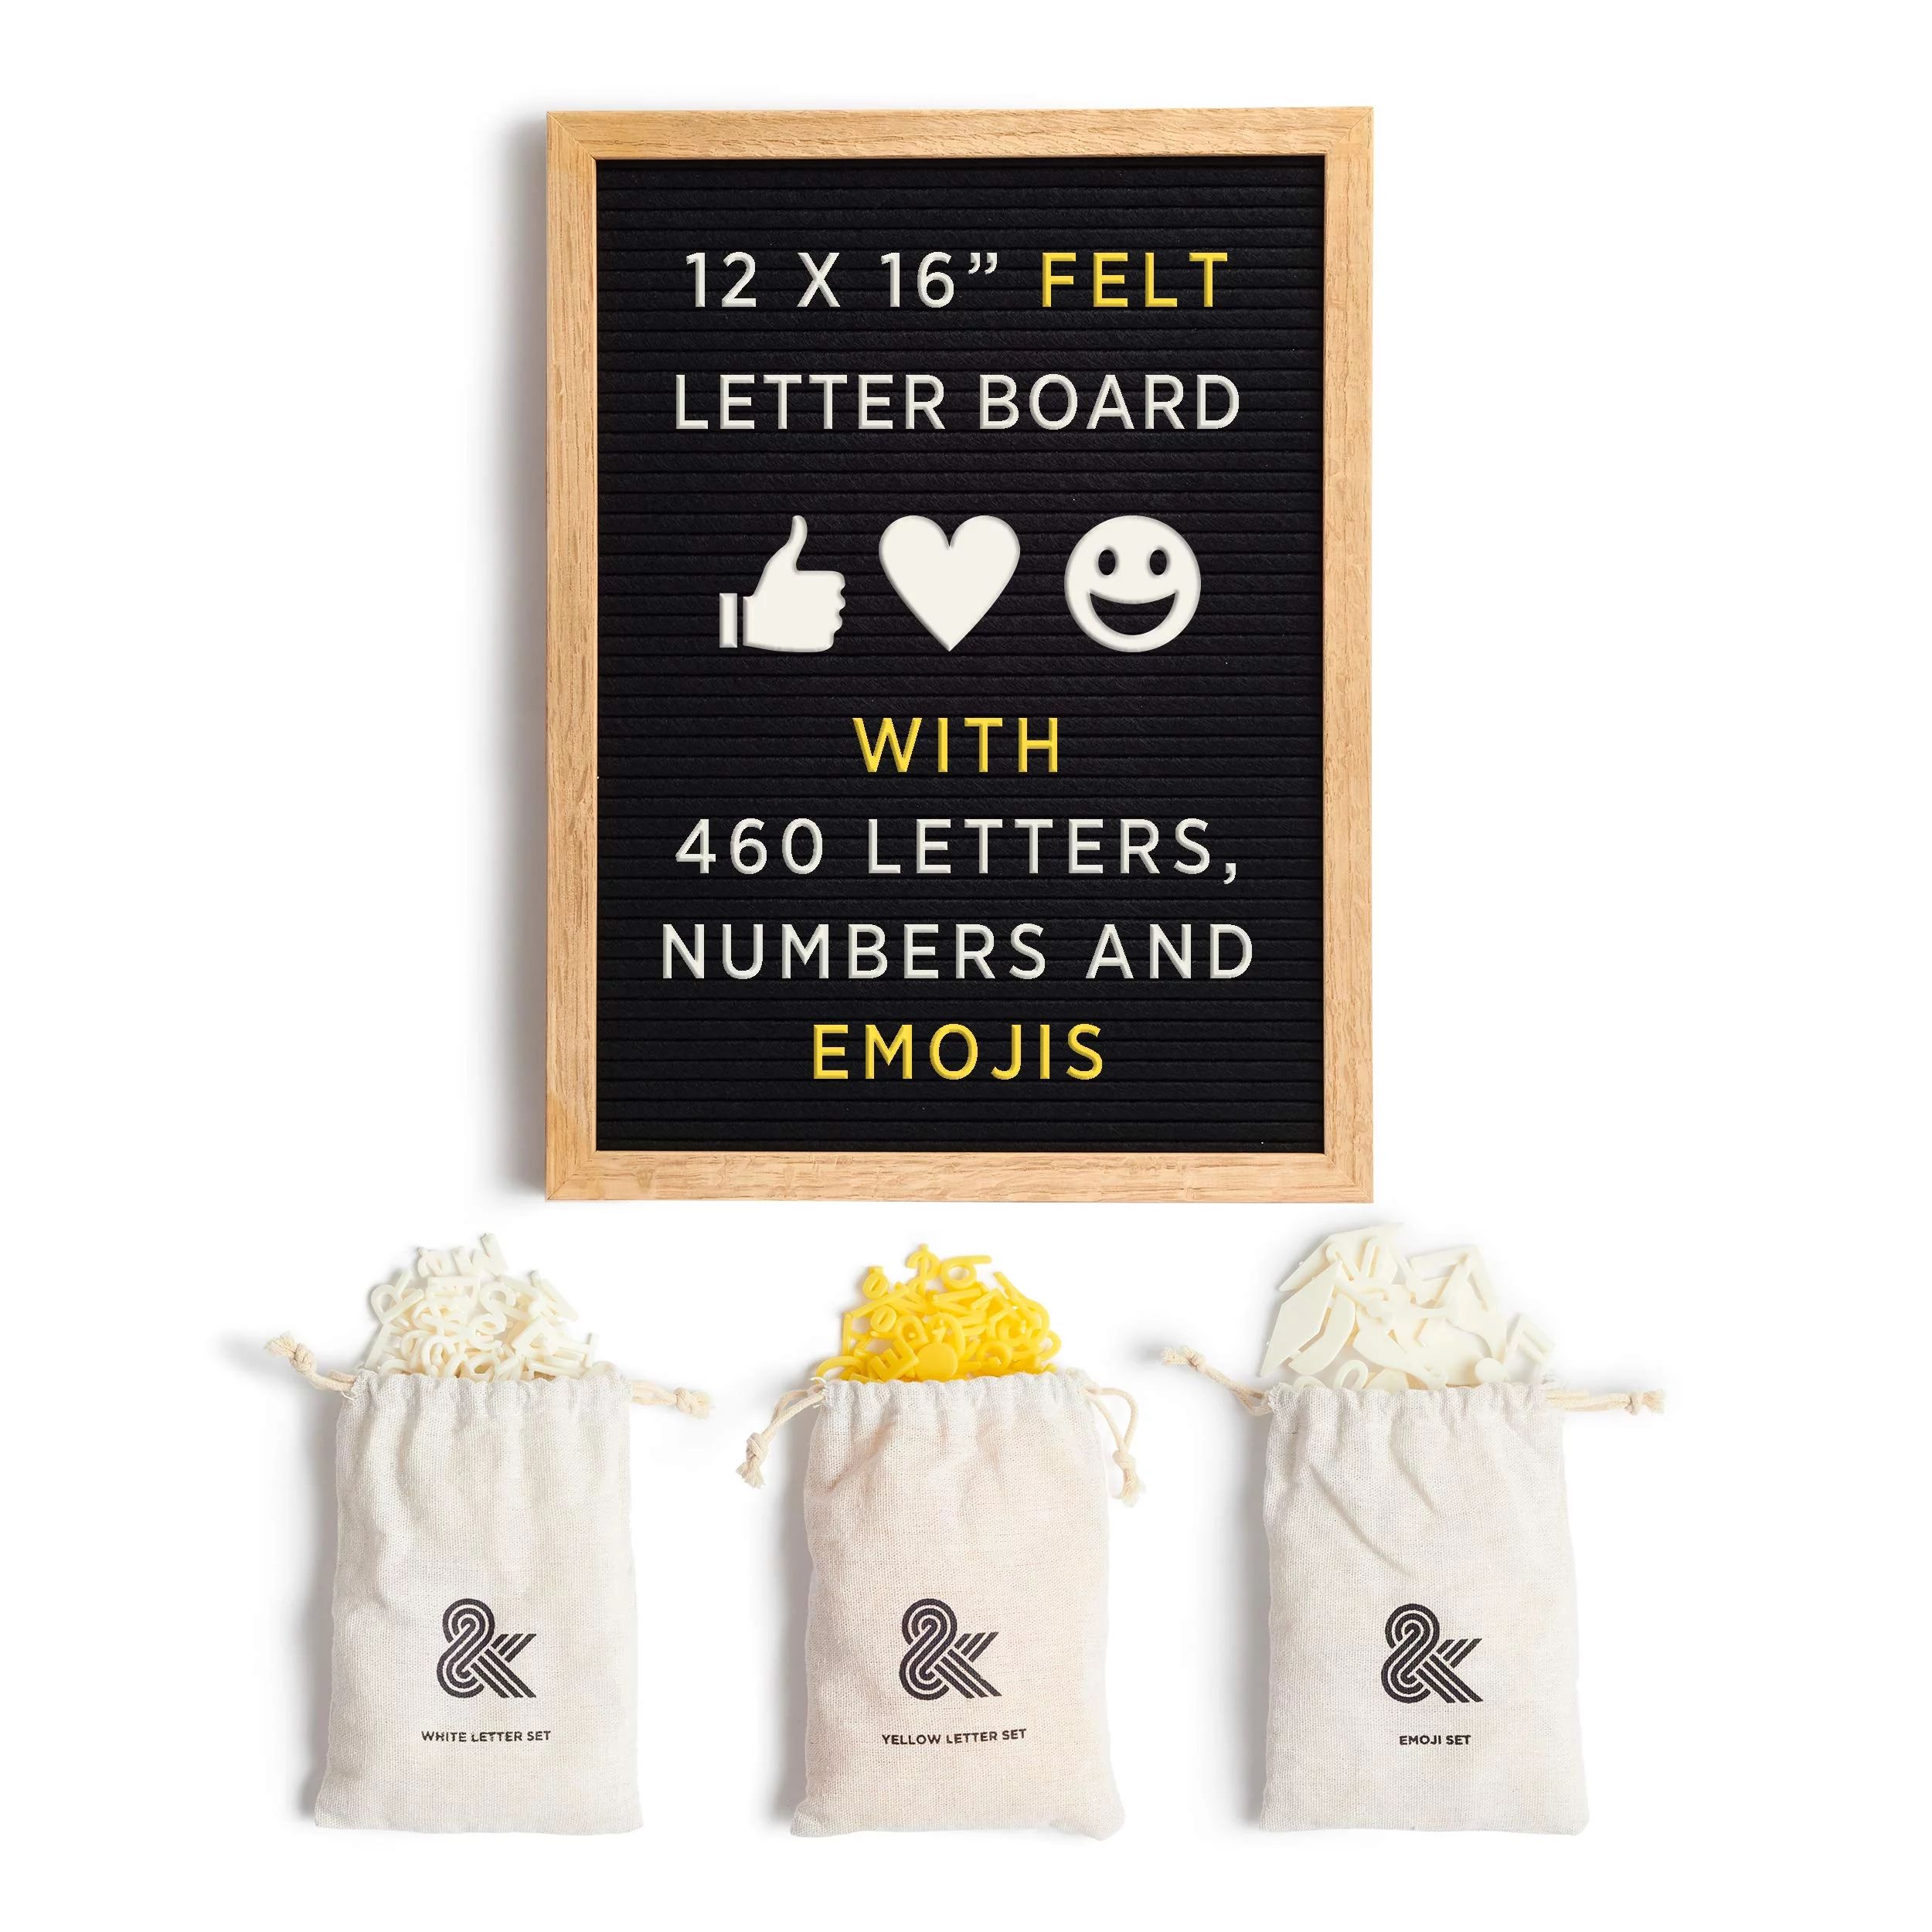 Amped & Co Felt Letter Board, Wall Hanging Message Board, 460 Letters and Oversized Emojis | Walmart (US)